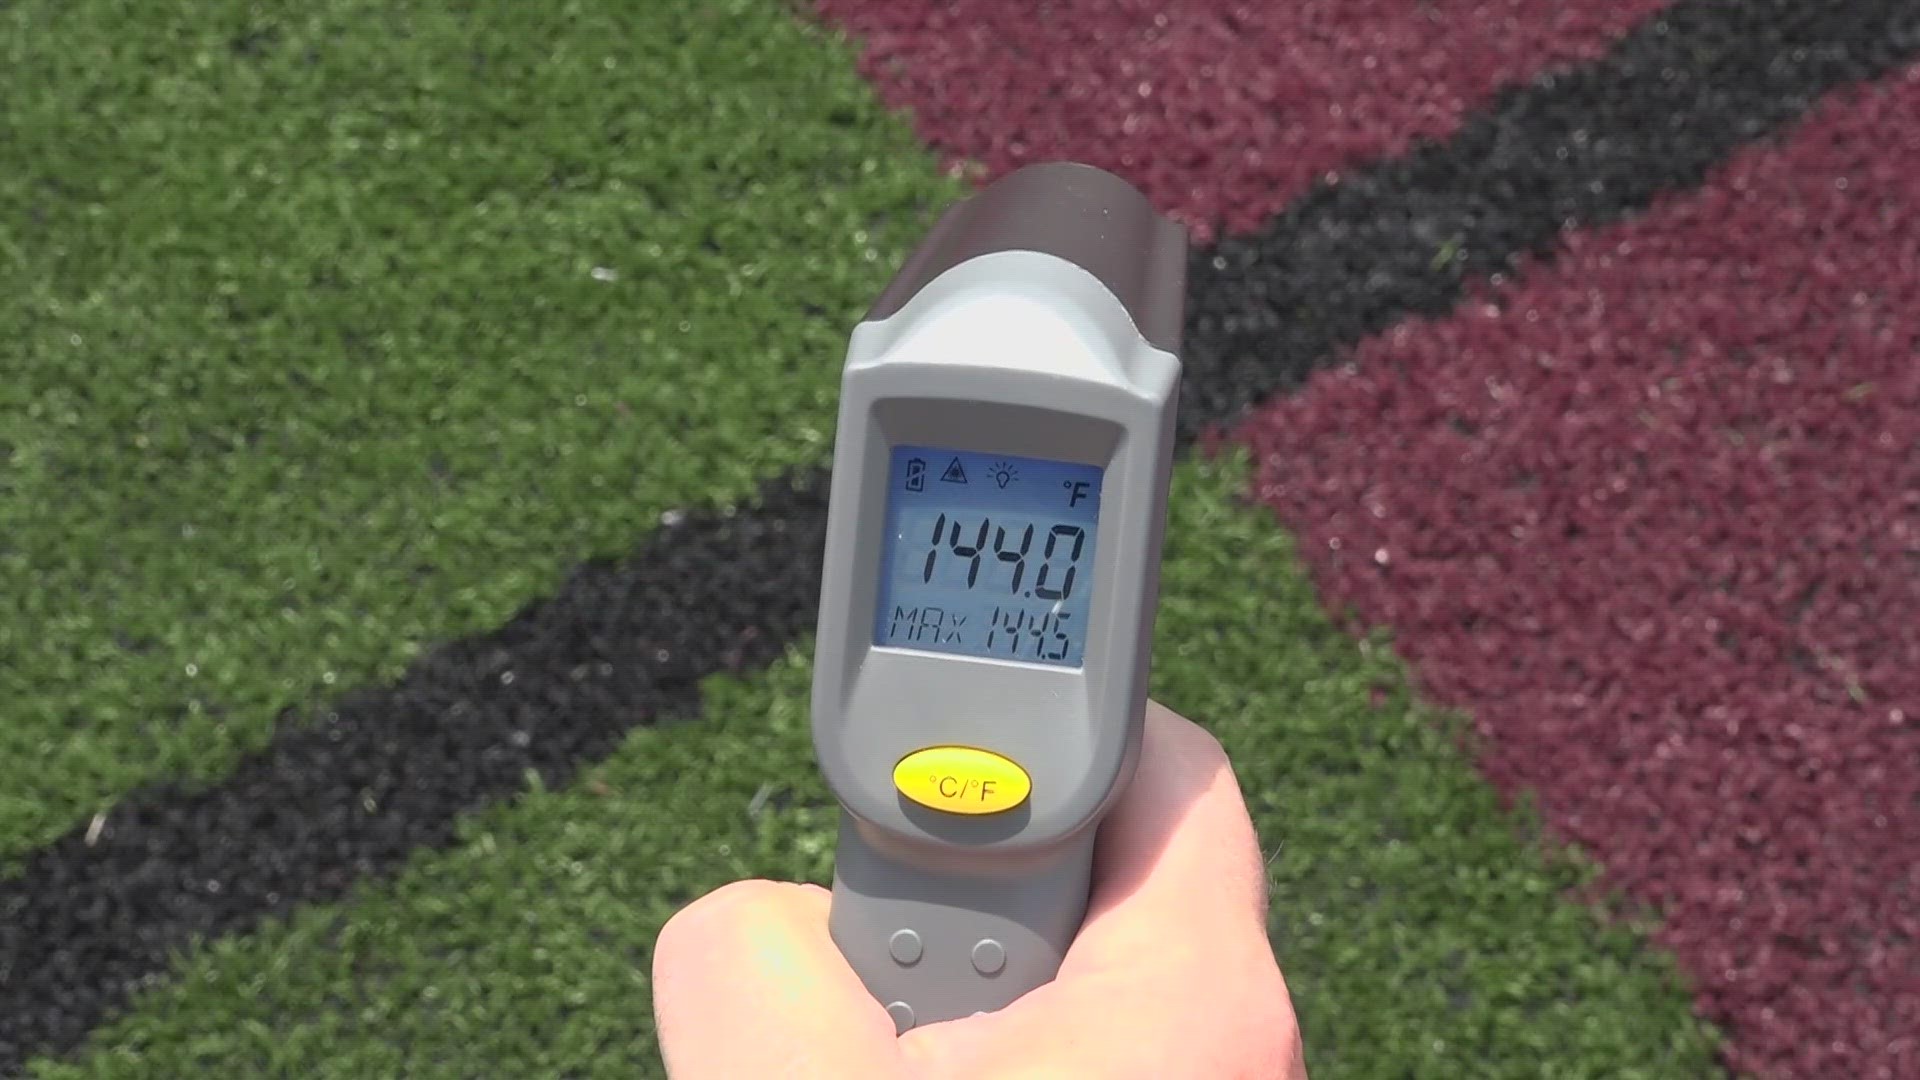 The extreme heat means high school athletic departments are having to make changes. De Smet head coach John Merritt has learned a thing or two.